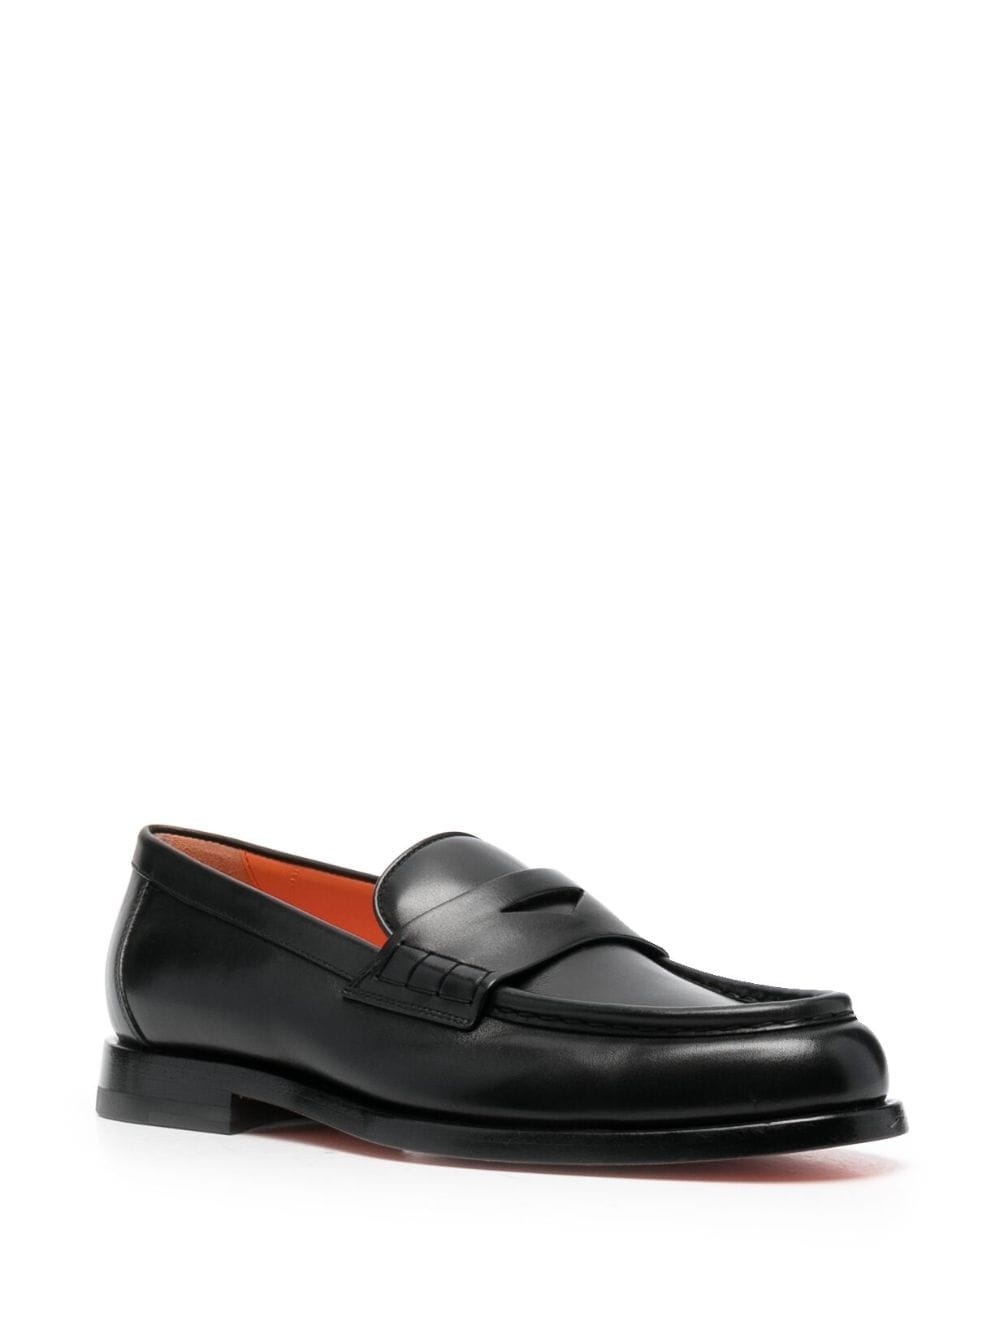 flat leather loafers - 2